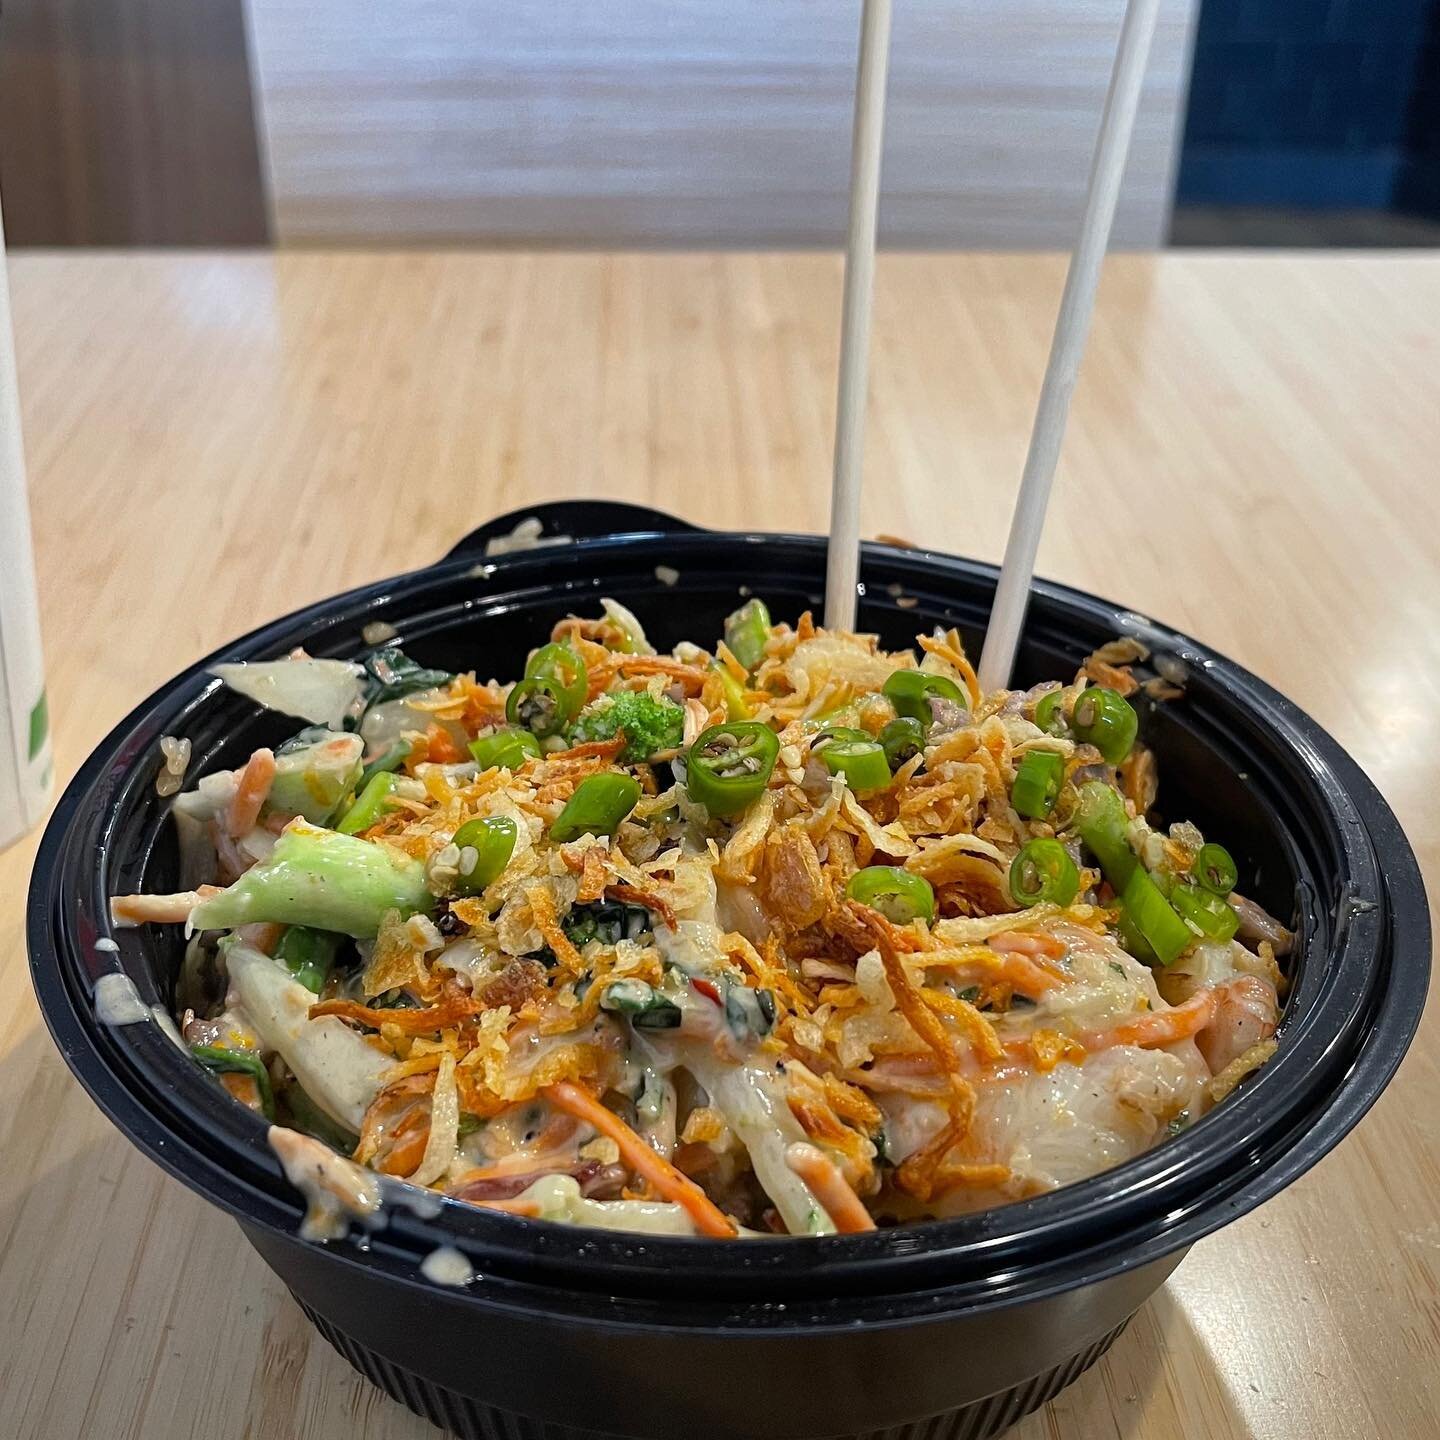 Eating healthy made easy 🤤&nbsp;

By the way, we are now open Monday-Saturday 11am - 8pm 🙌

Thanks for the photo Drew 📸
.
.
.
.
.
#utah #utahfoodie #utahcounty #wasatchcounty&nbsp;#hebercity&nbsp;#midwayutah&nbsp;#lehi #ogden #utahcheck #utahblogg